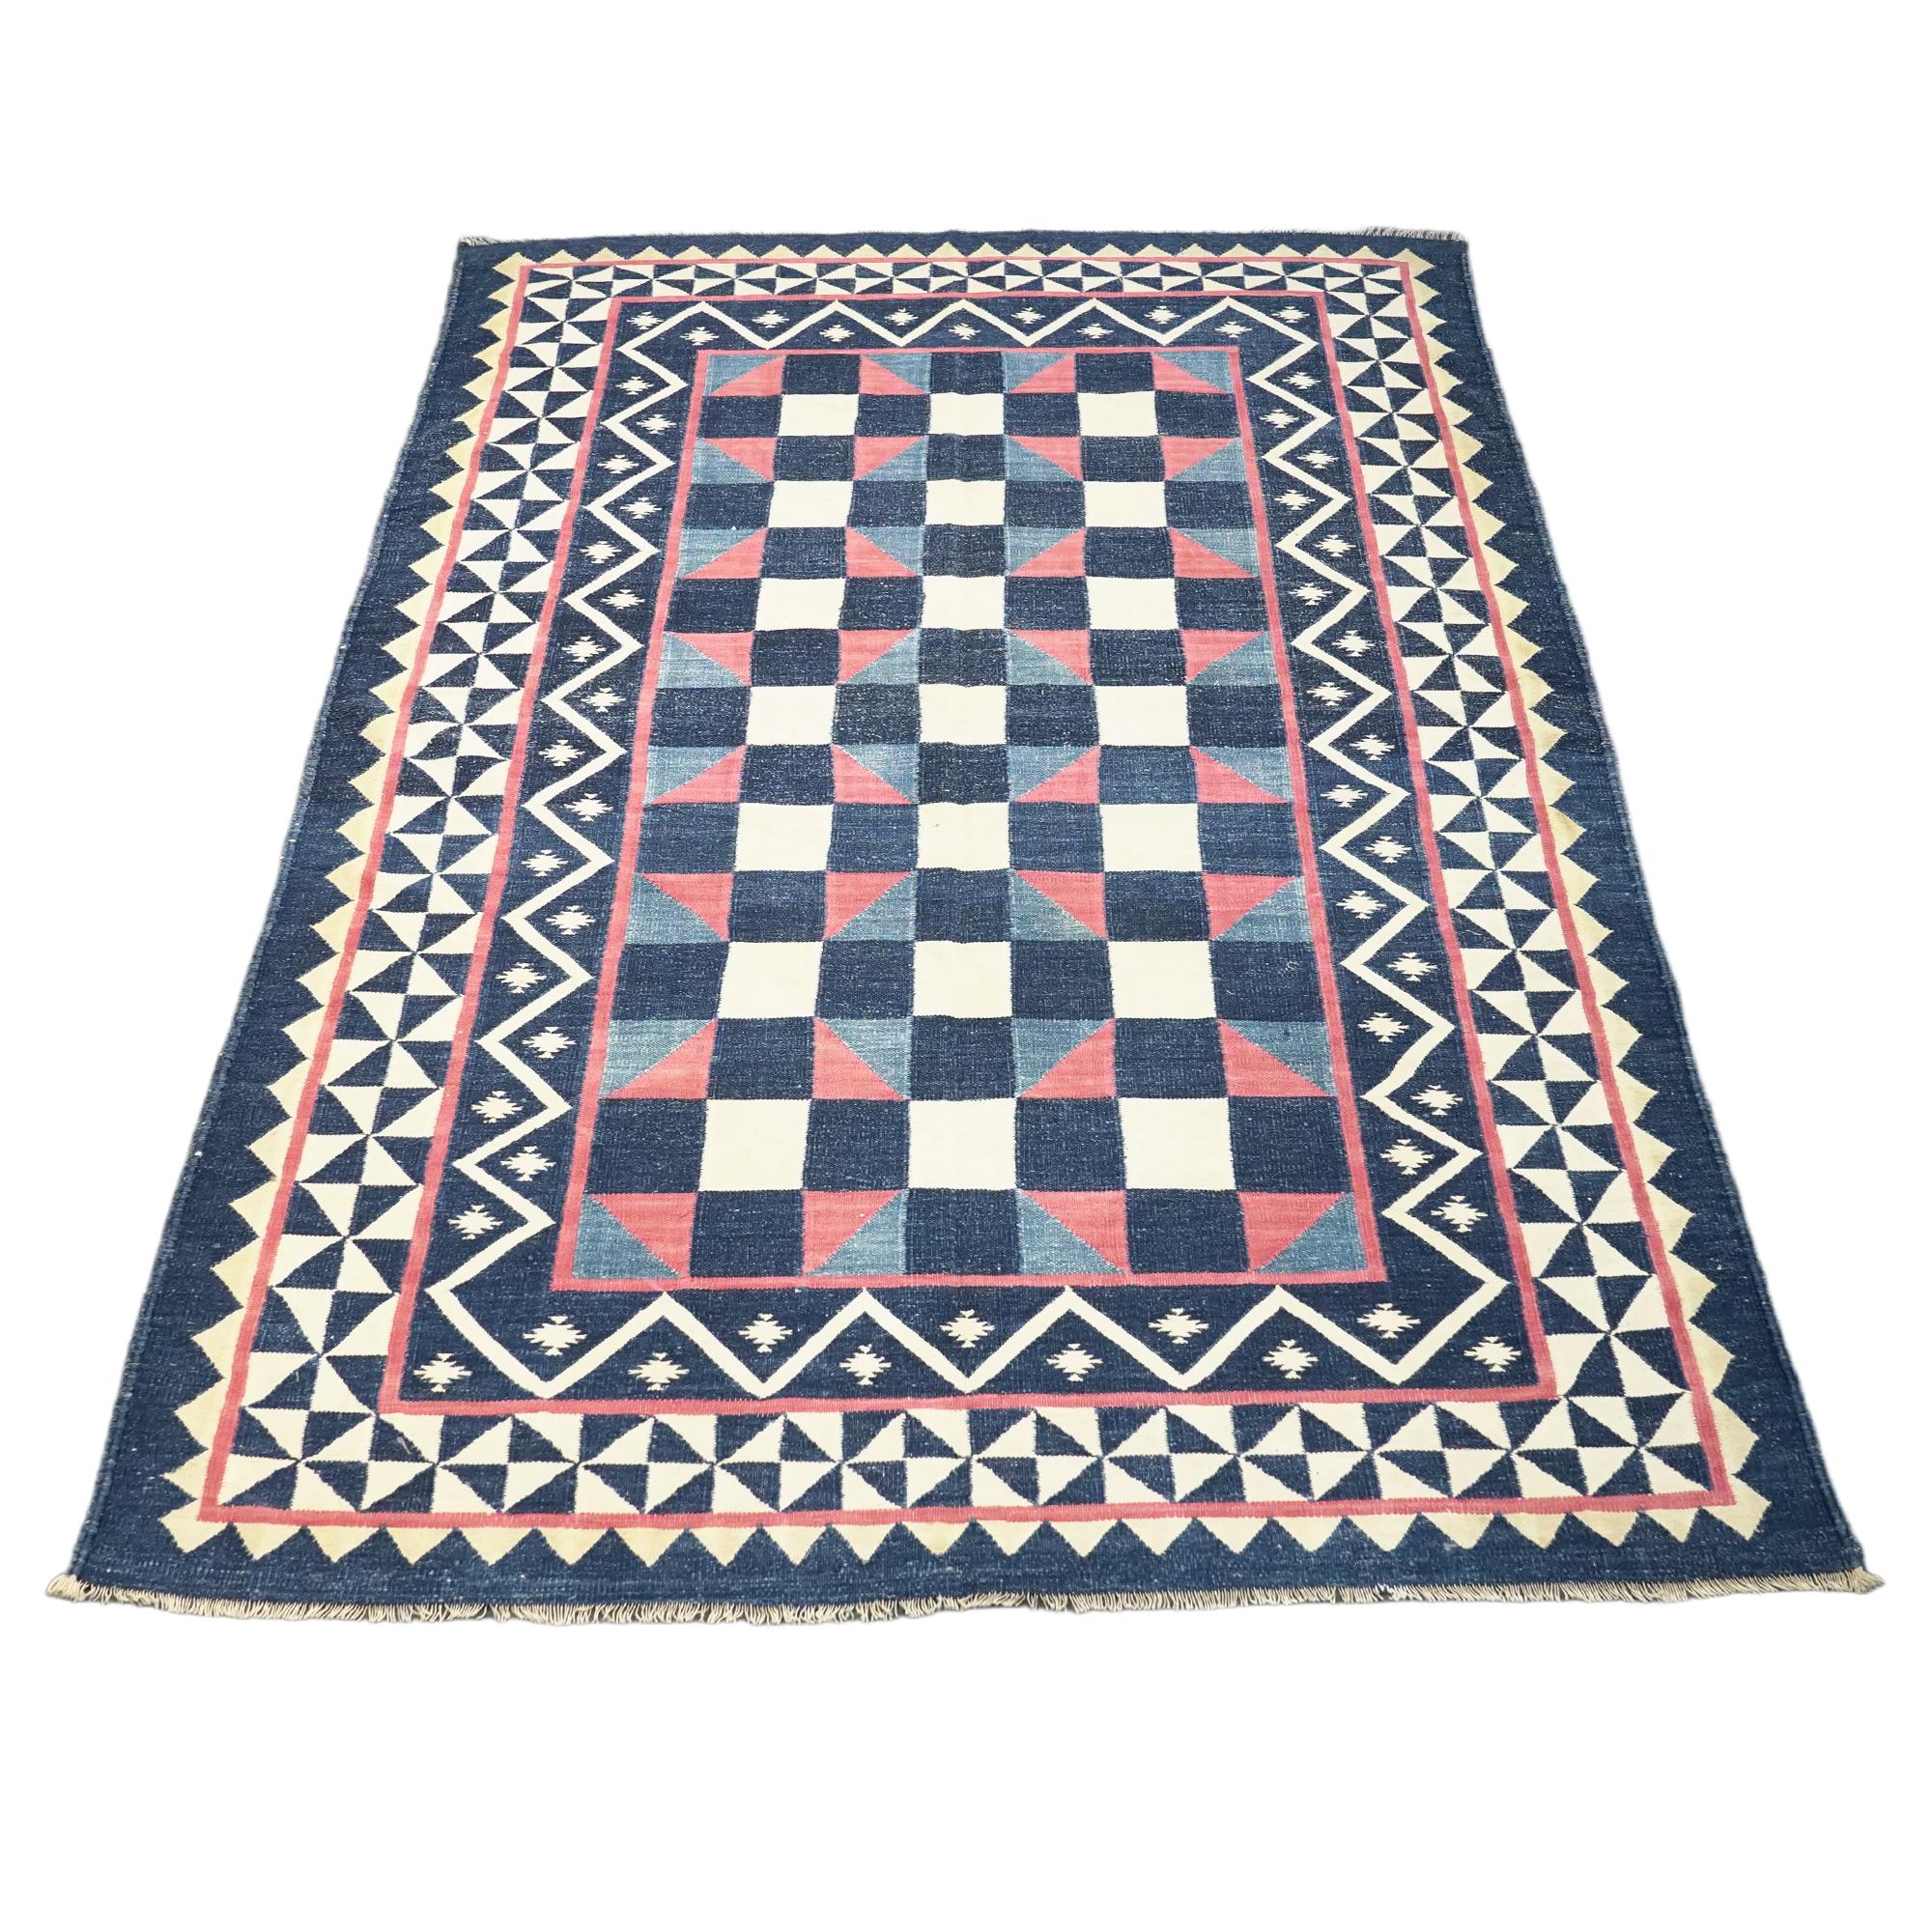 Indian Vintage Dhurrie Rug, with Polychromatic Patterns, from Rug & Kilim For Sale